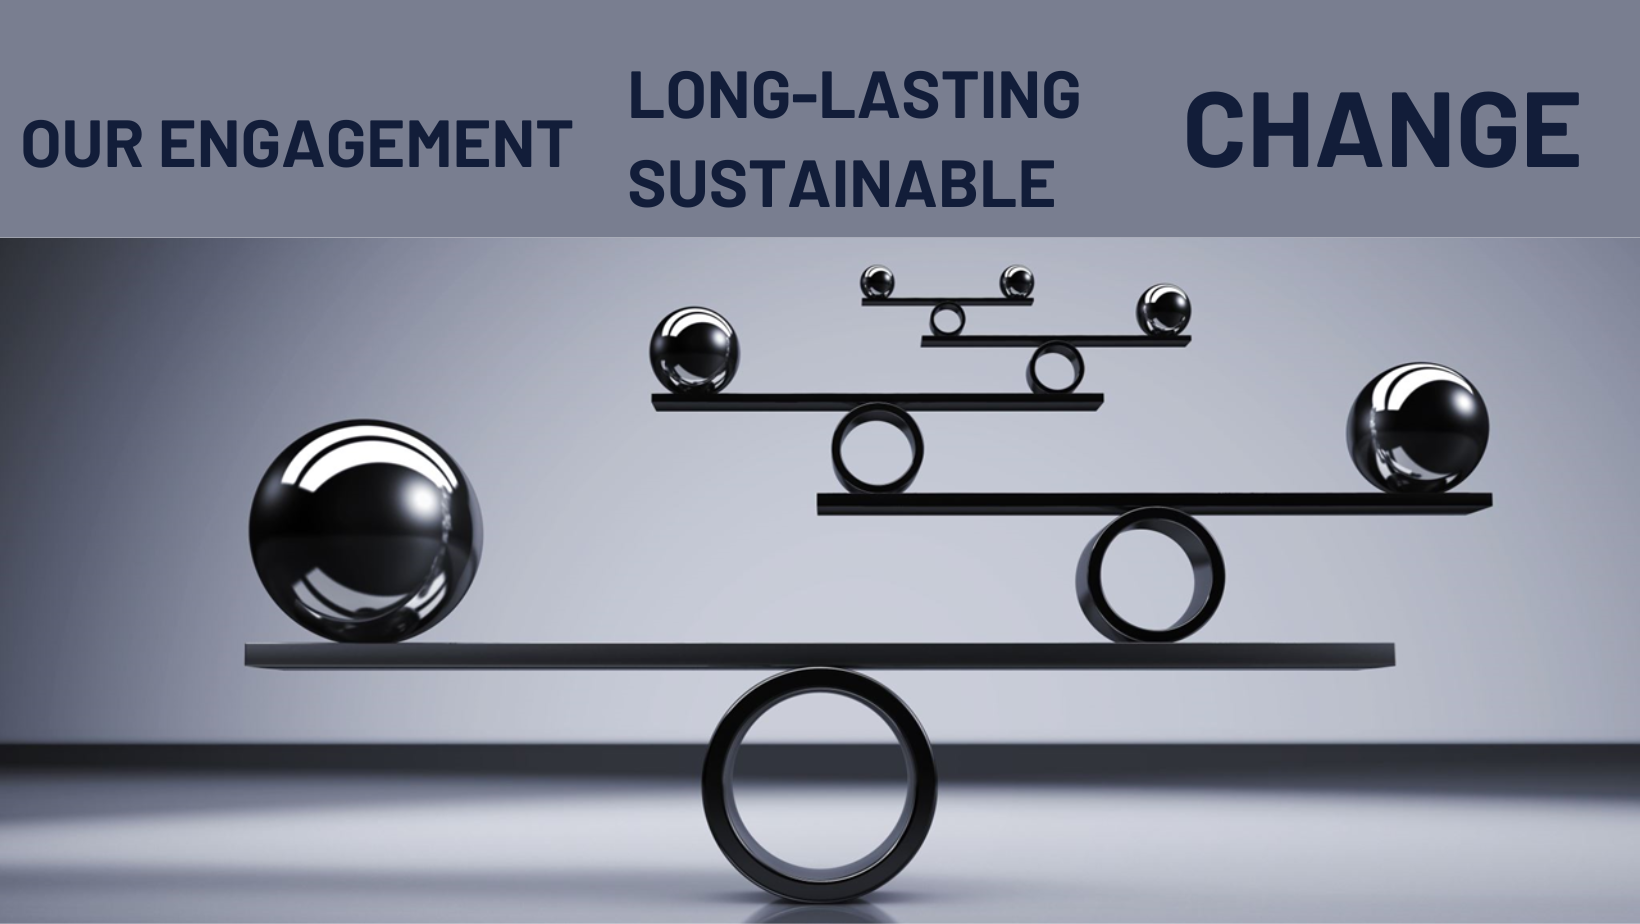 Text reads "Our engagement for long-lasting sustainable change"
With balls balancing on plates on 5 layers.